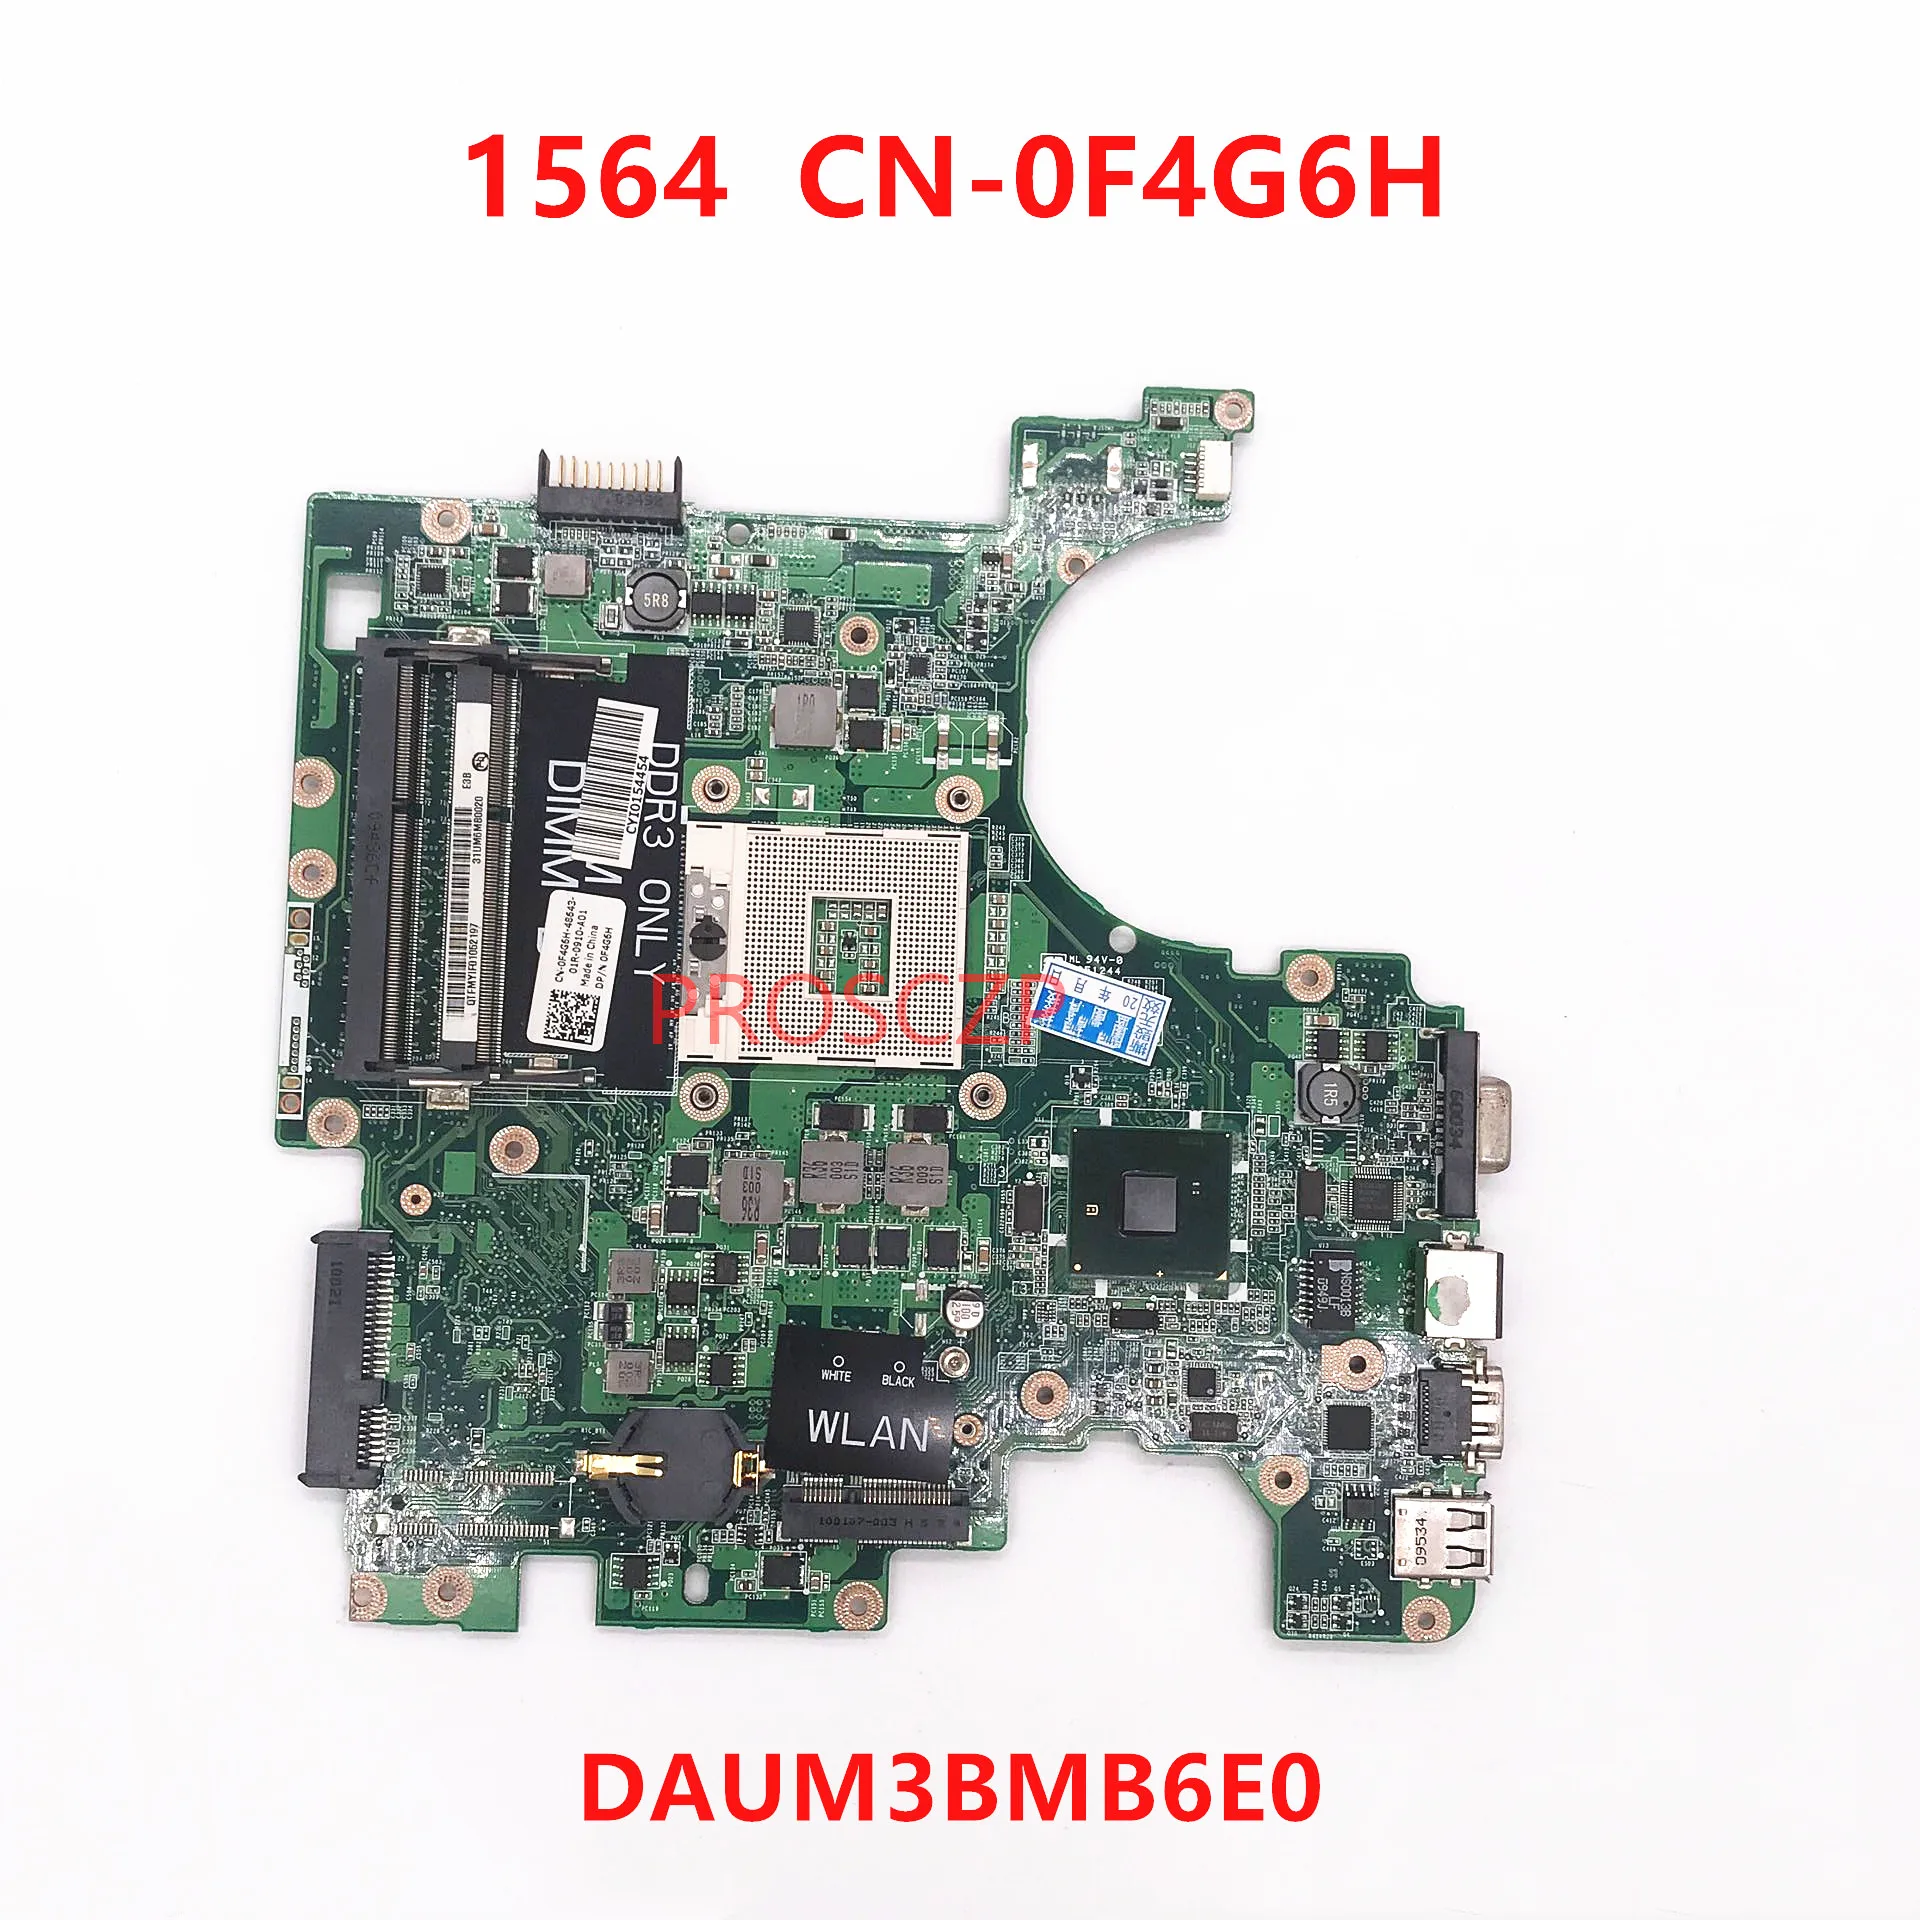 Free Shipping High Quality Mainboard For DELL 1564 Laptop Motherboard CN-0F4G6H 0F4G6H F4G6H DAUM3BMB6E0 With HM55 100%Tested OK